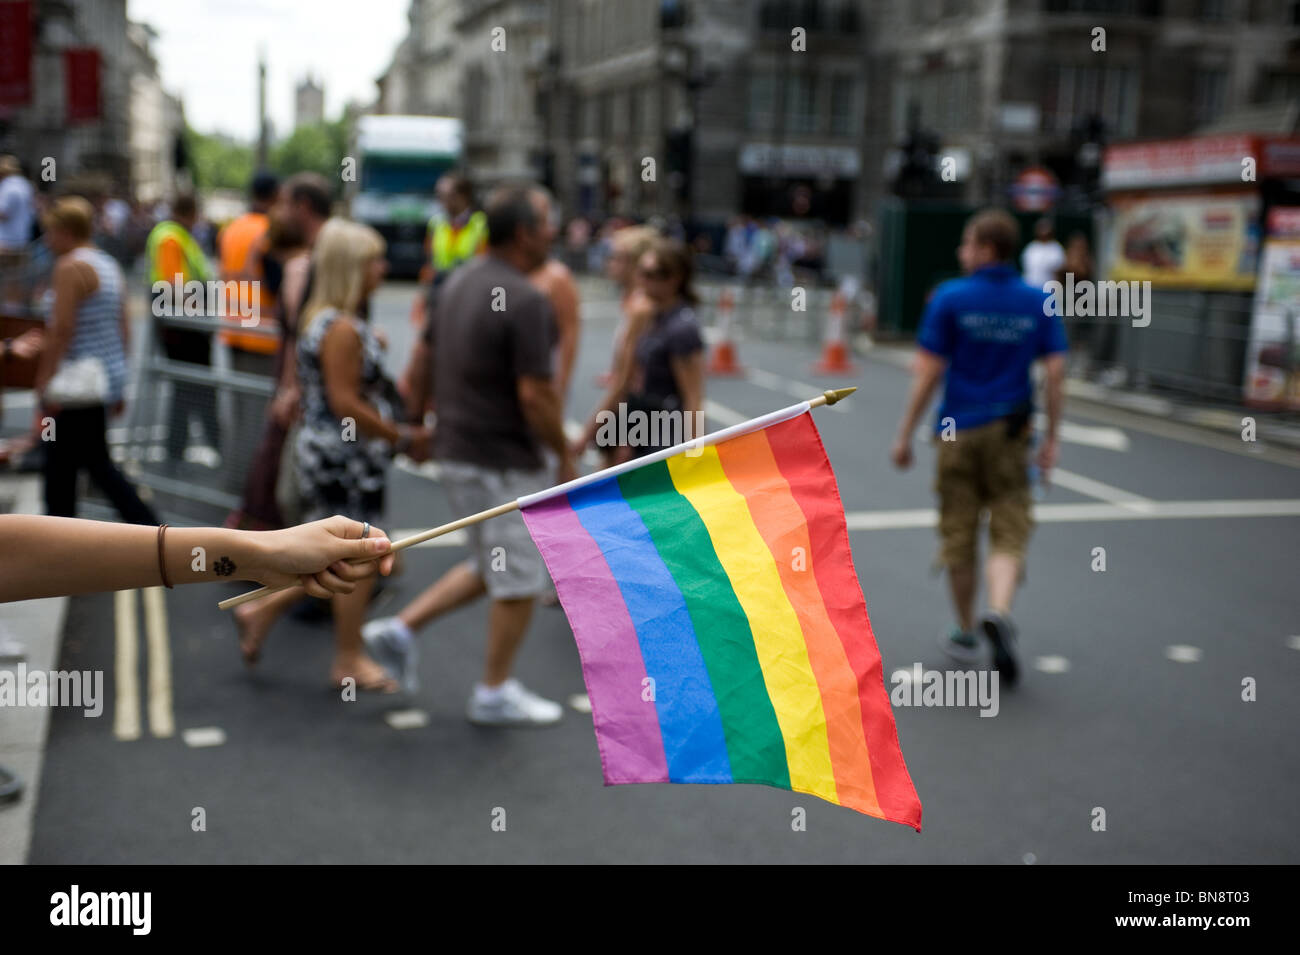 A Raibow flag held at the Pride London celebrations. Stock Photo